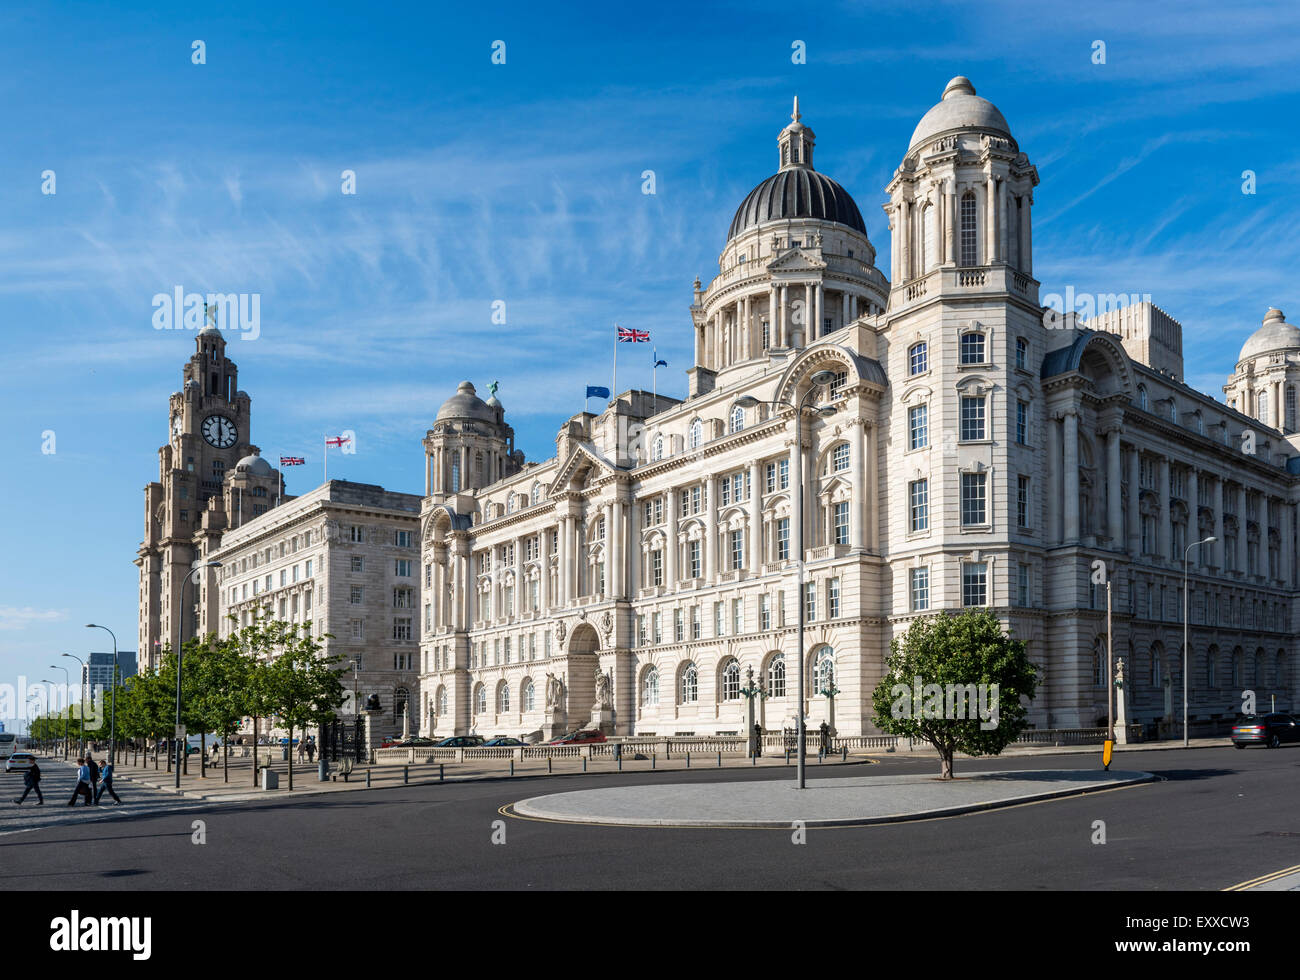 The Port of Liverpool Building, known as the Dock Office, a listed building in Liverpool, England, UK on the waterfront Stock Photo